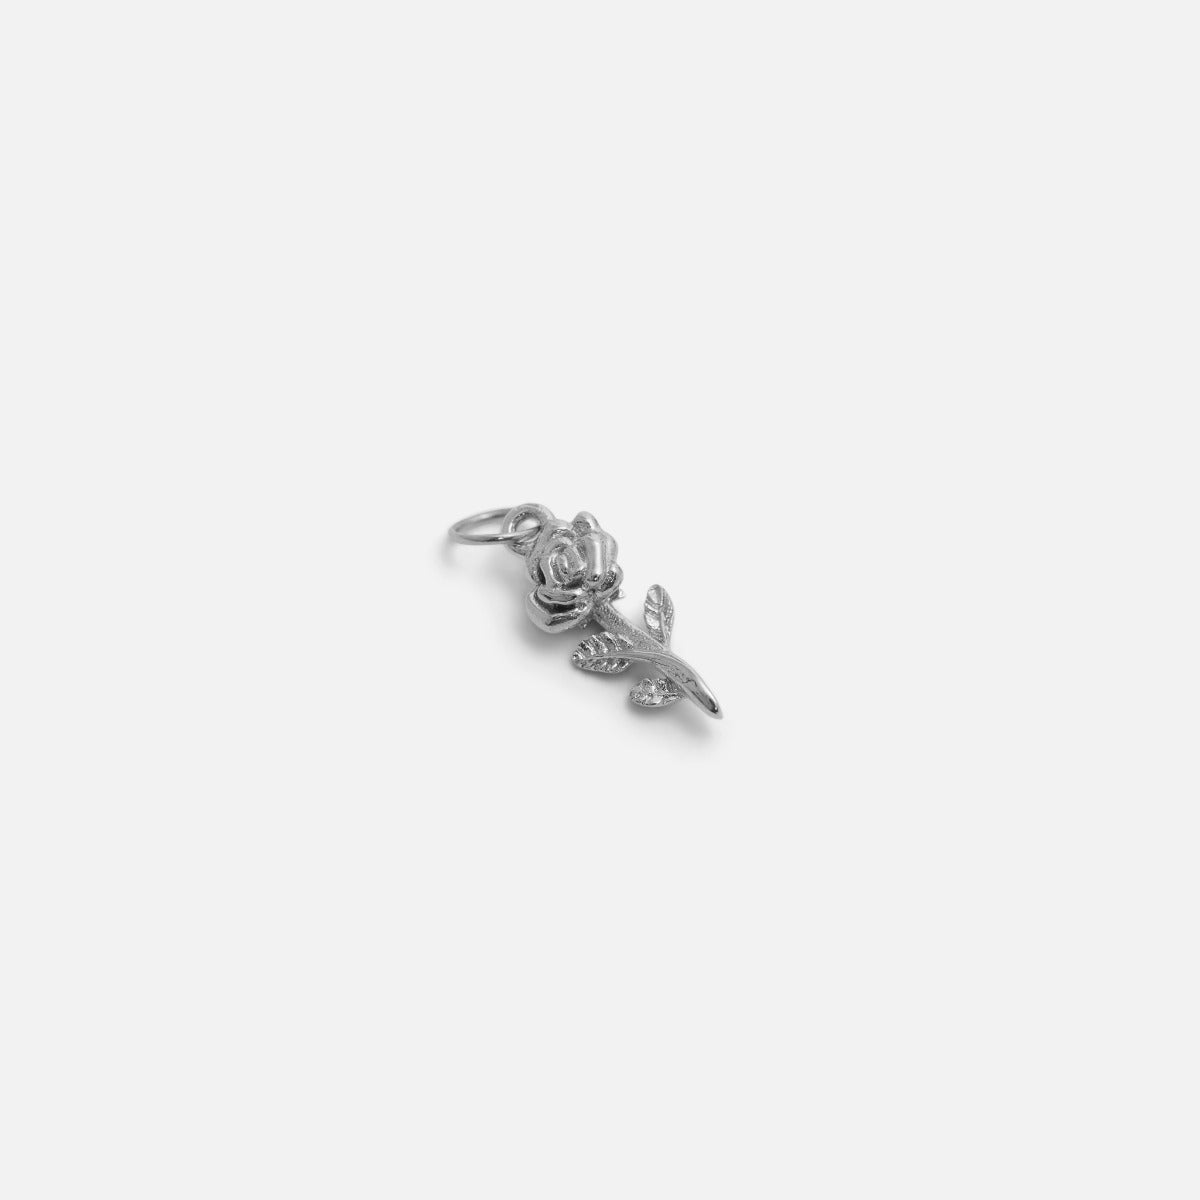 Small silver flower charm